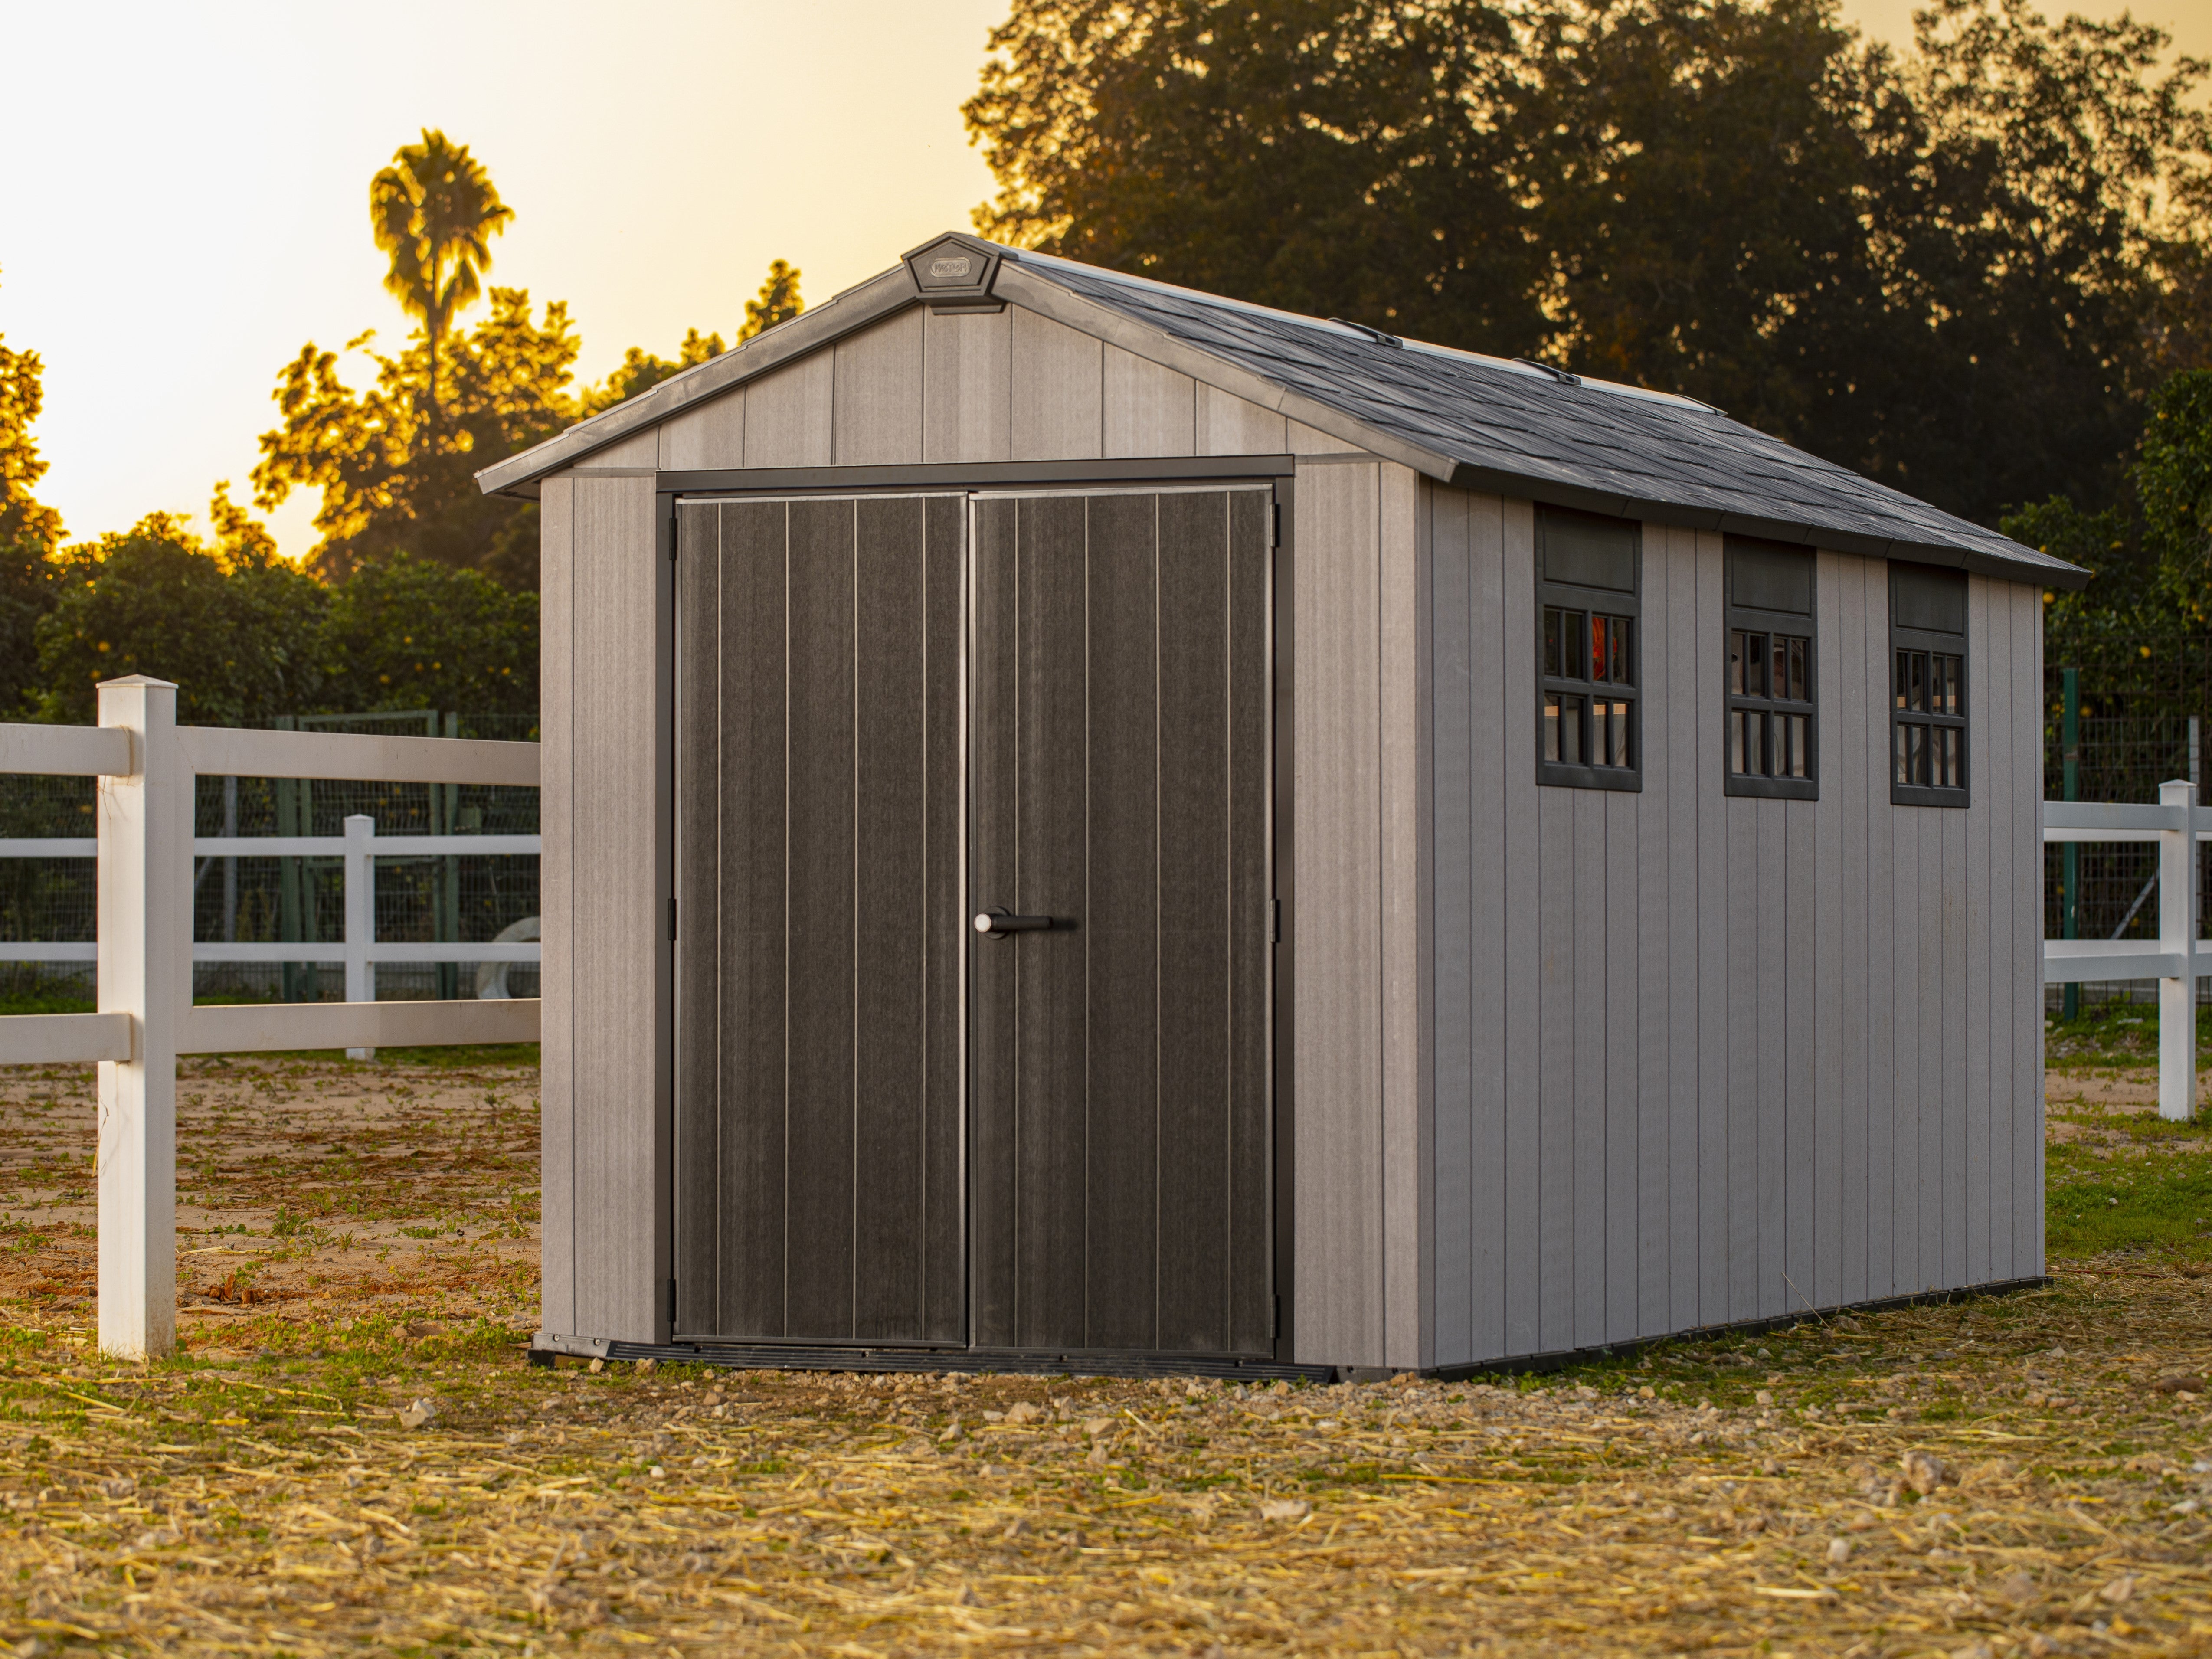 Keter Oakland 7515 Shed in rural setting